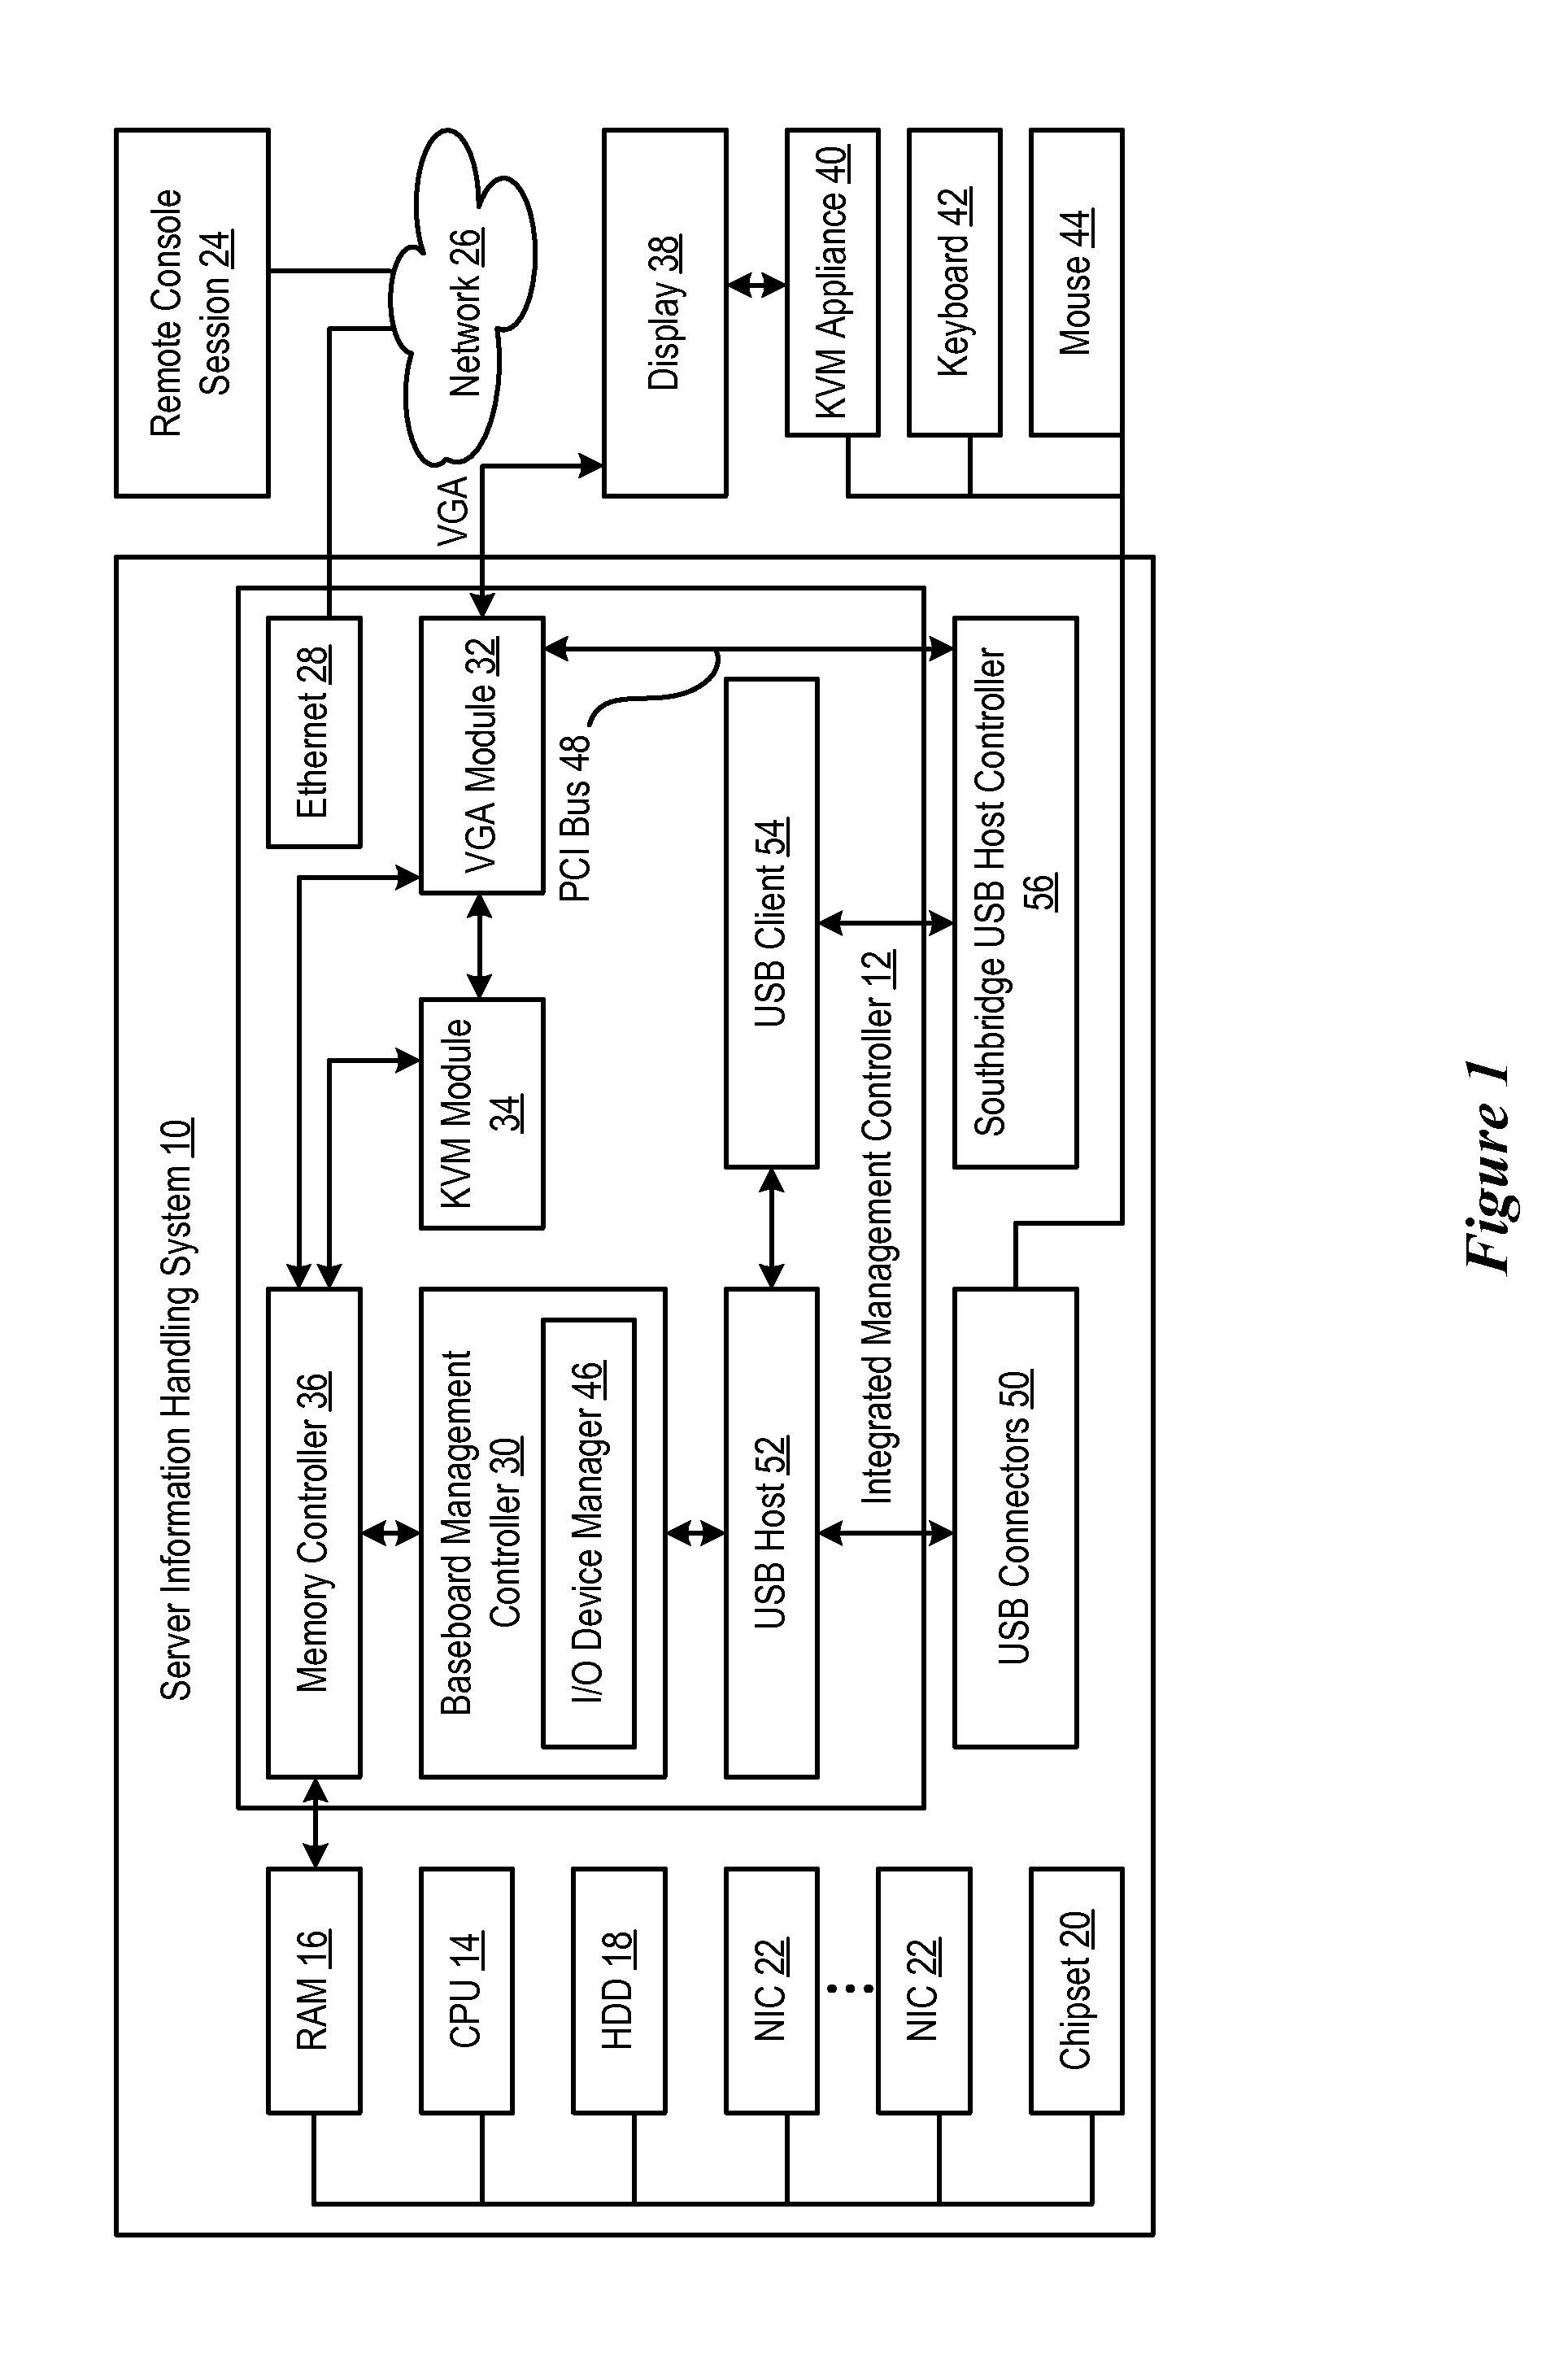 System and Method for Server Information Handling System Management Through Local I/O Devices